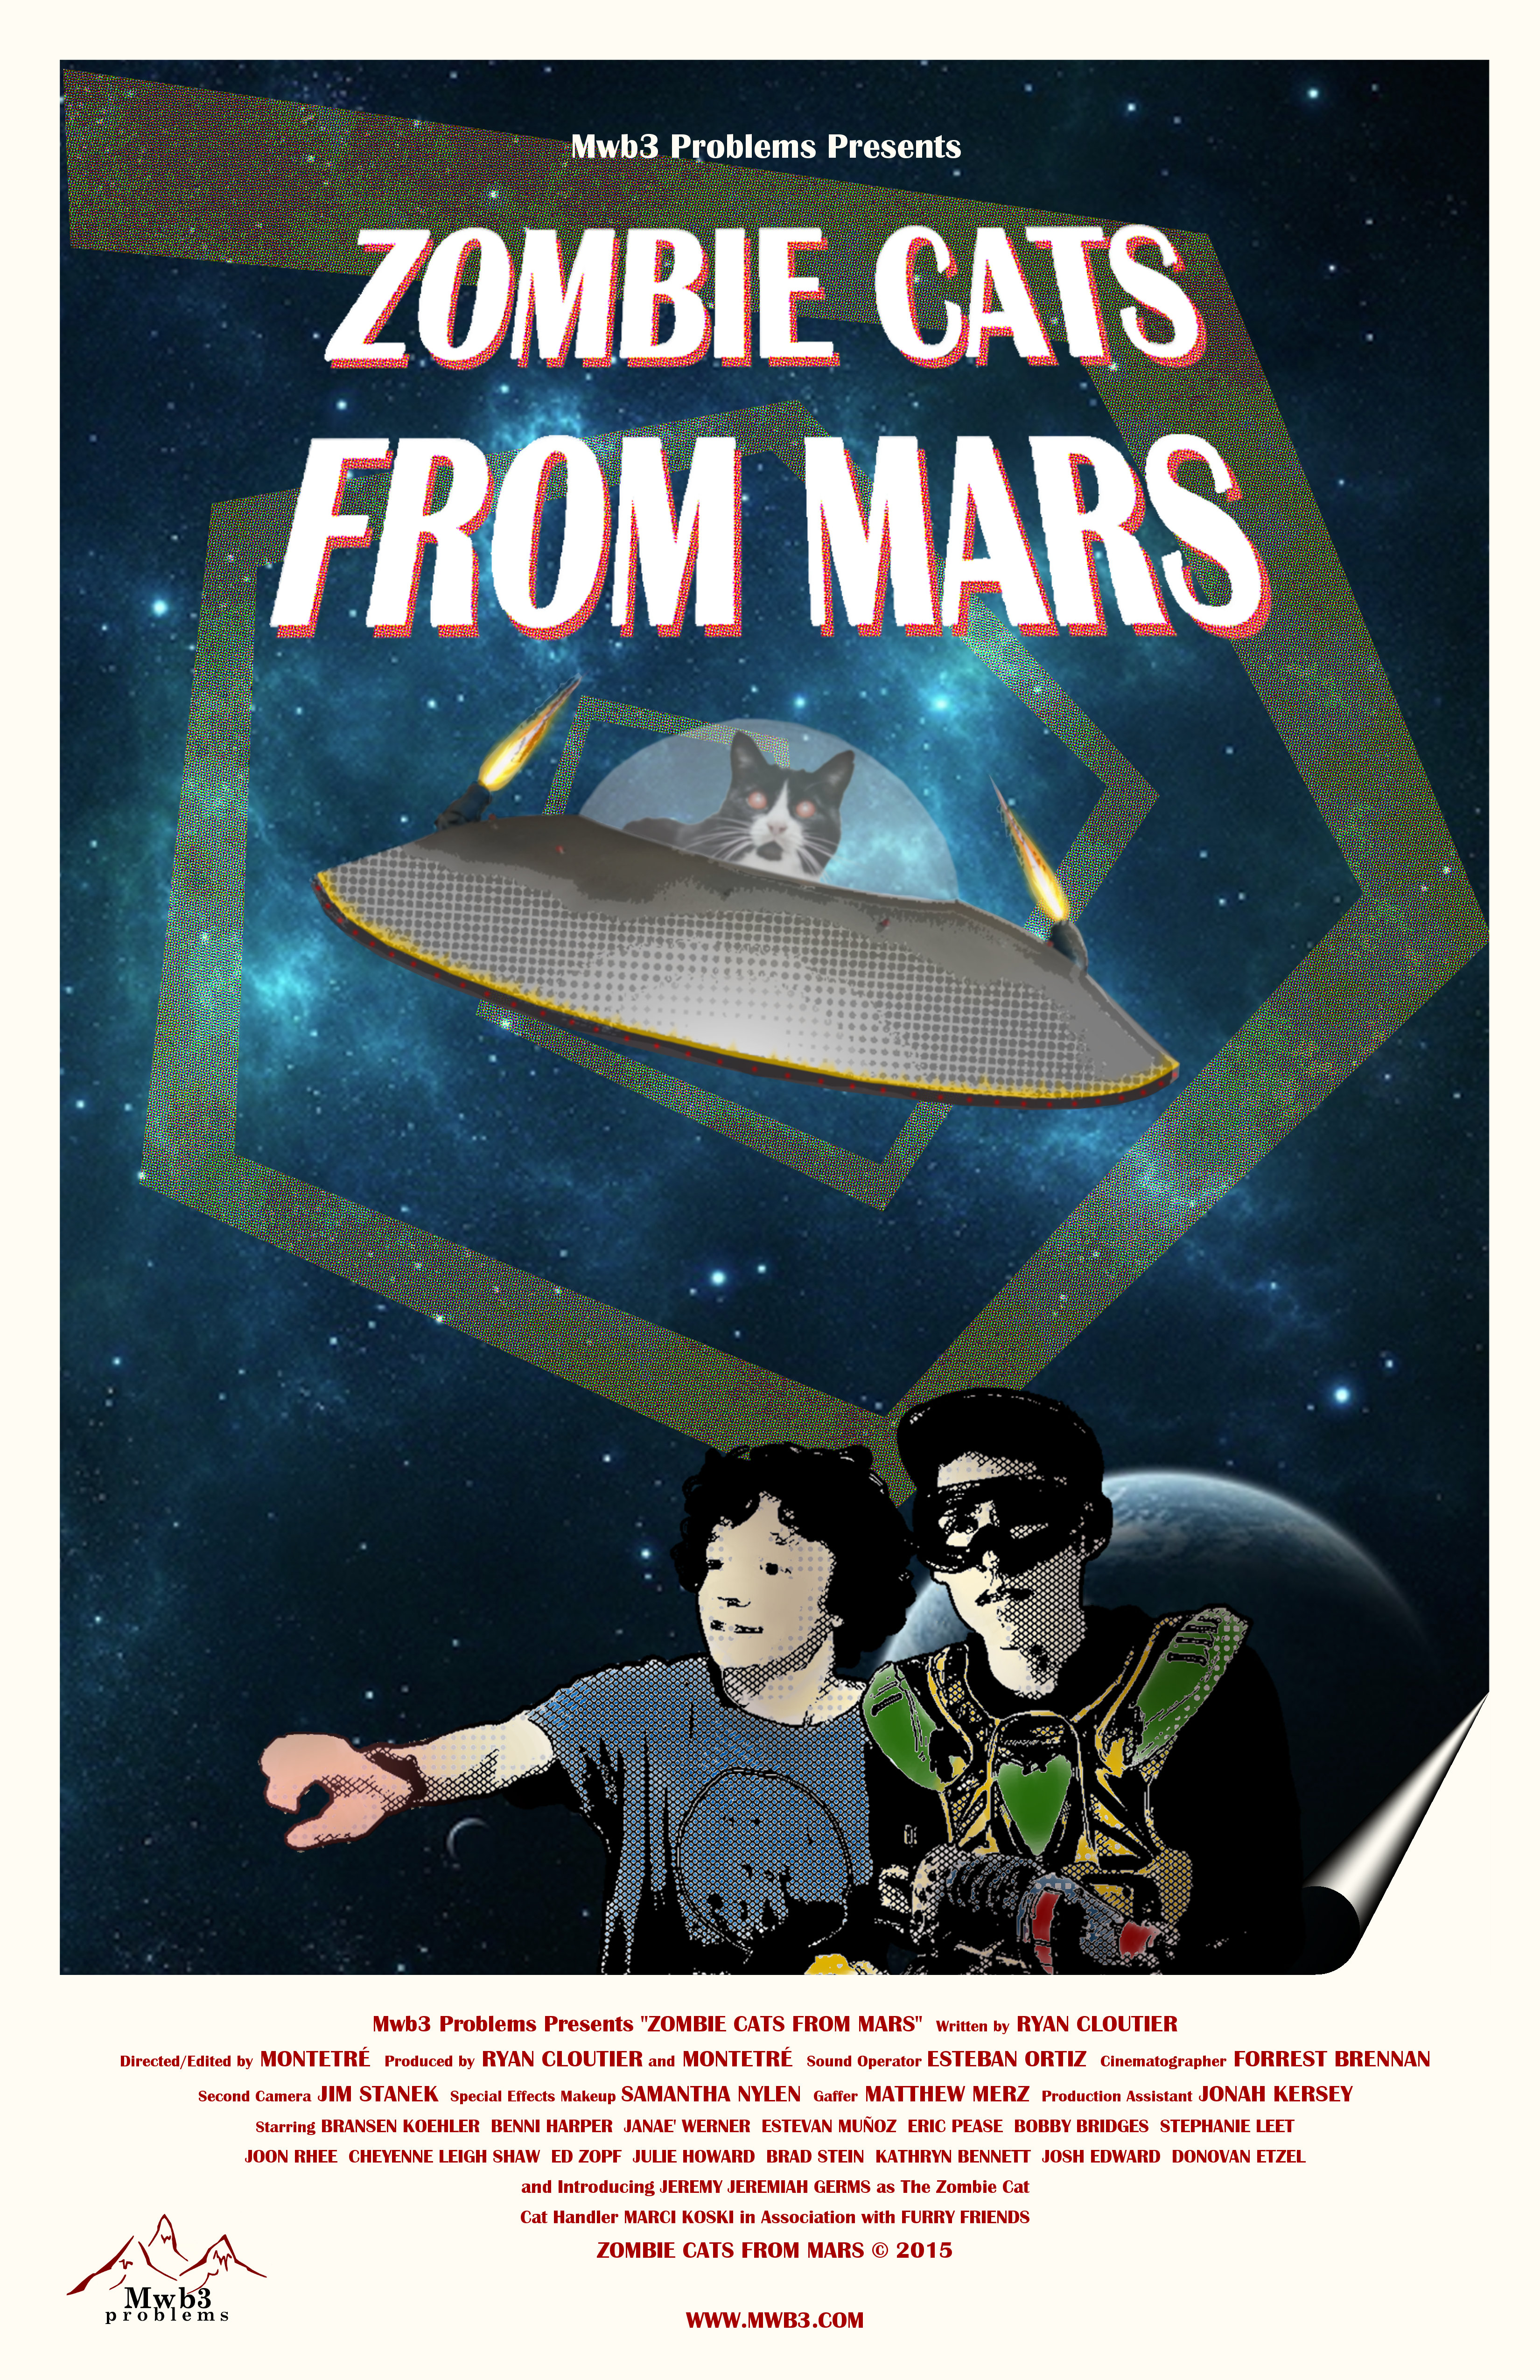 Zombie Cats from Mars - Official Poster